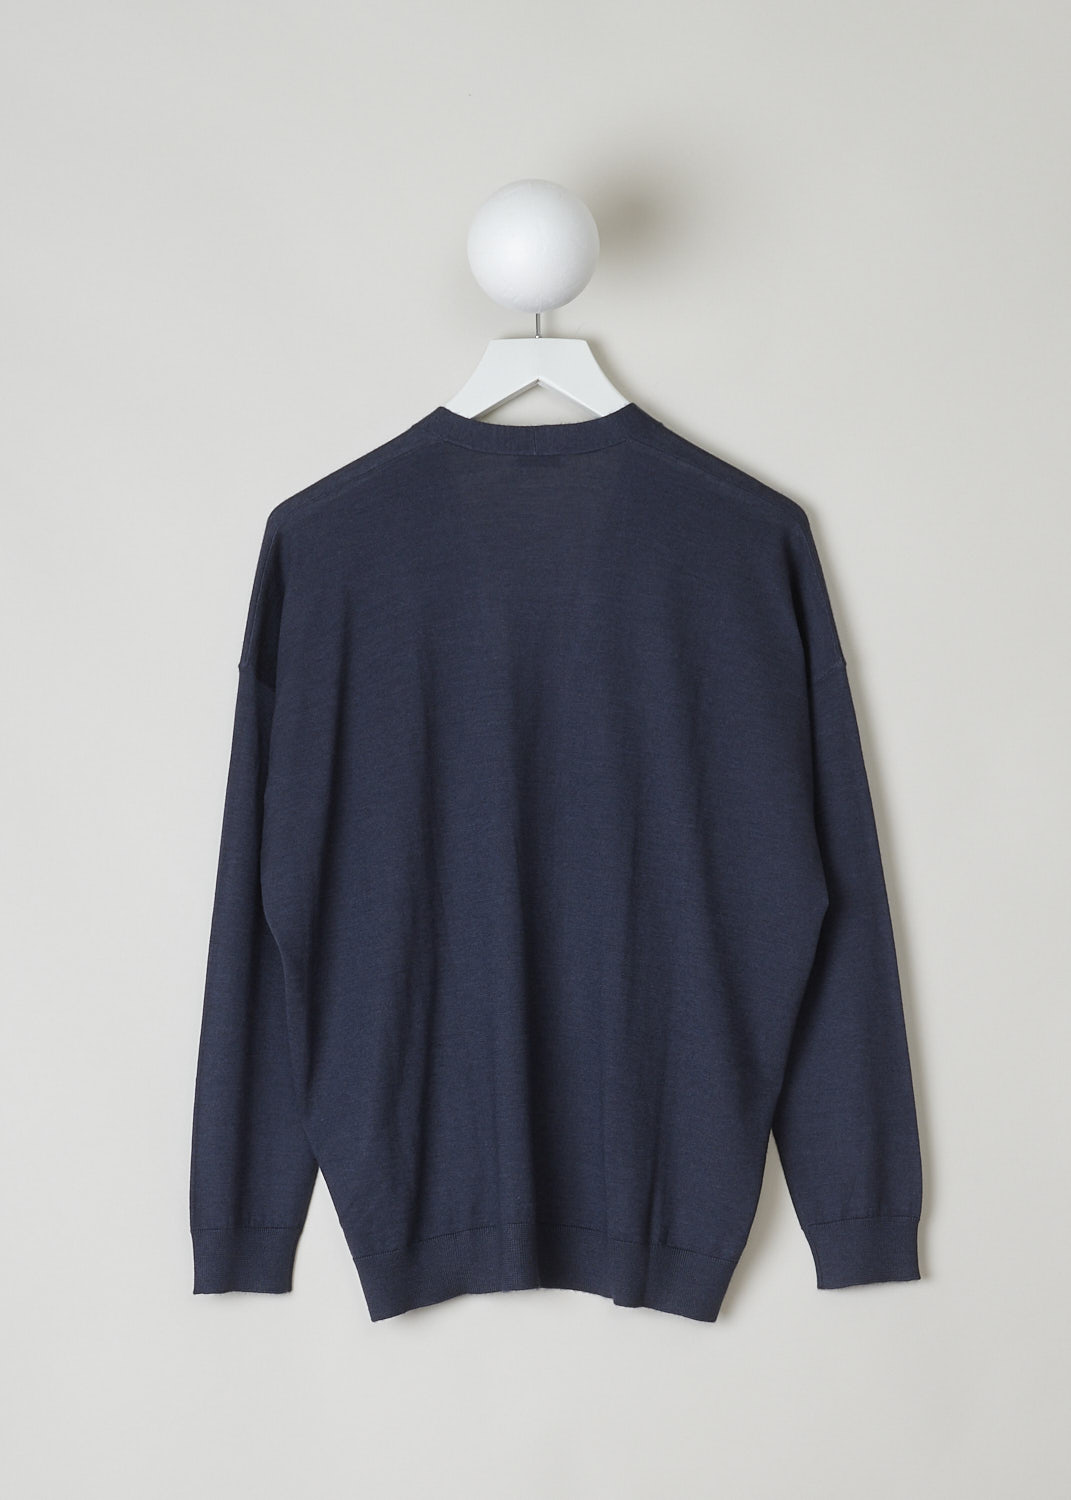 BRUNELLO CUCINELLI, NAVY BLUE LONG WITH SUBTLE MONILI DETAIL, M13874202_C7186, Blue, Back, This navy blue long sleeve top is made with a lightweight cashmere blend. The top has a V-neckline that is decorated with the brand's signature monili beads. The cuffs and the hemline have a ribbed finish. 
